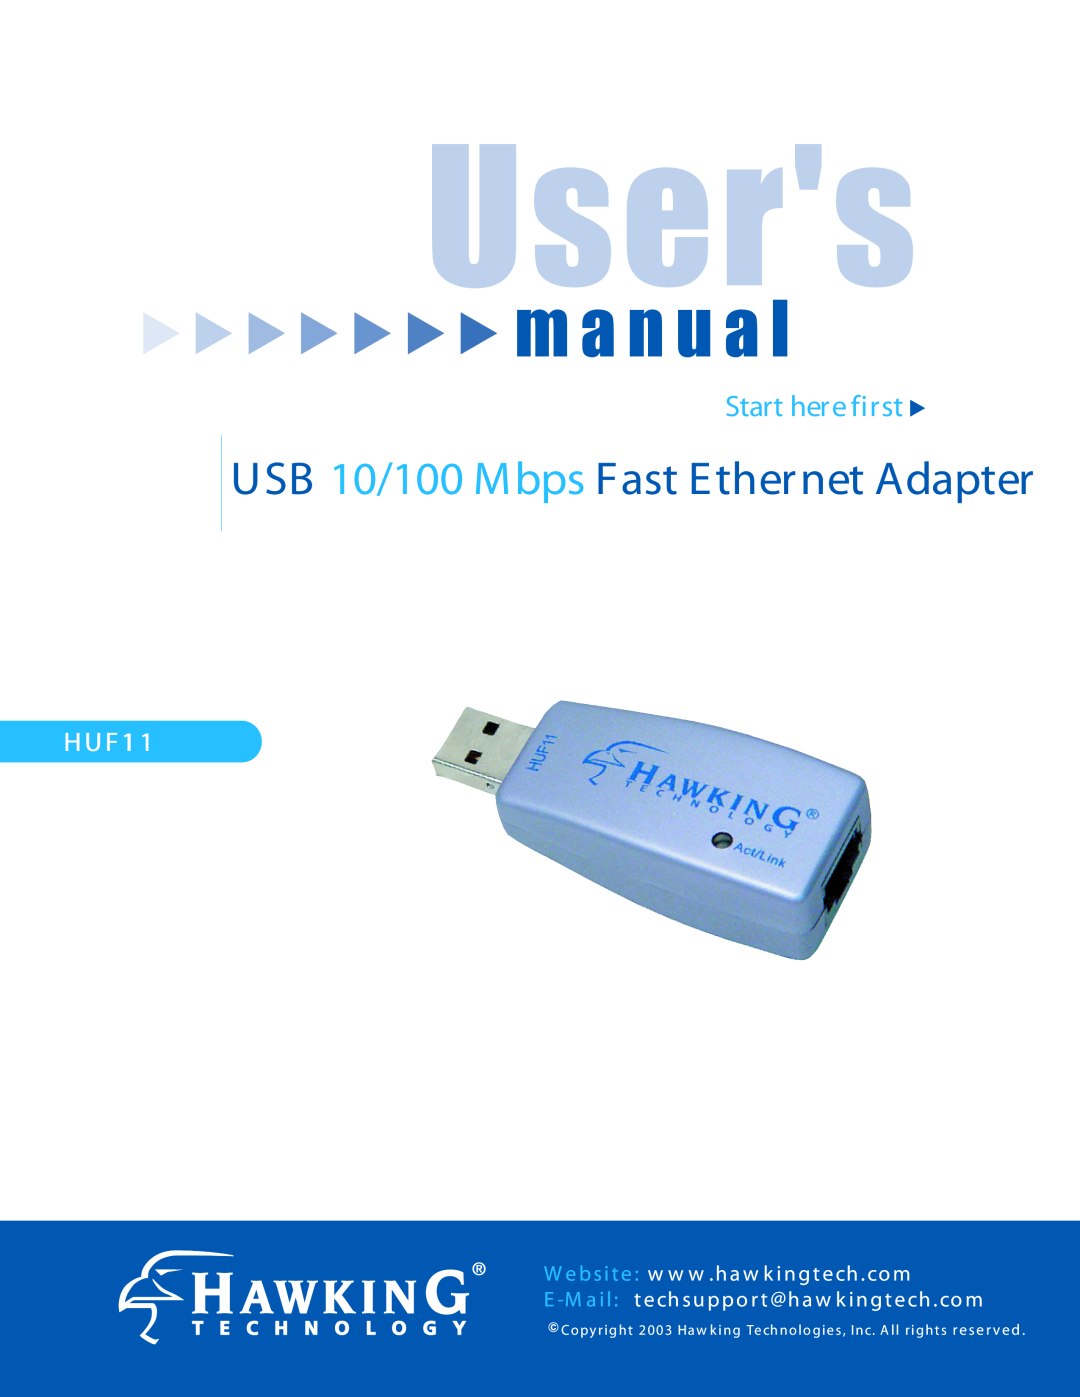 Hawking Technology user manual Users, m a n u a l, USB 10/100 Mbps Fast Ethernet Adapter, Start here first, HUF1 